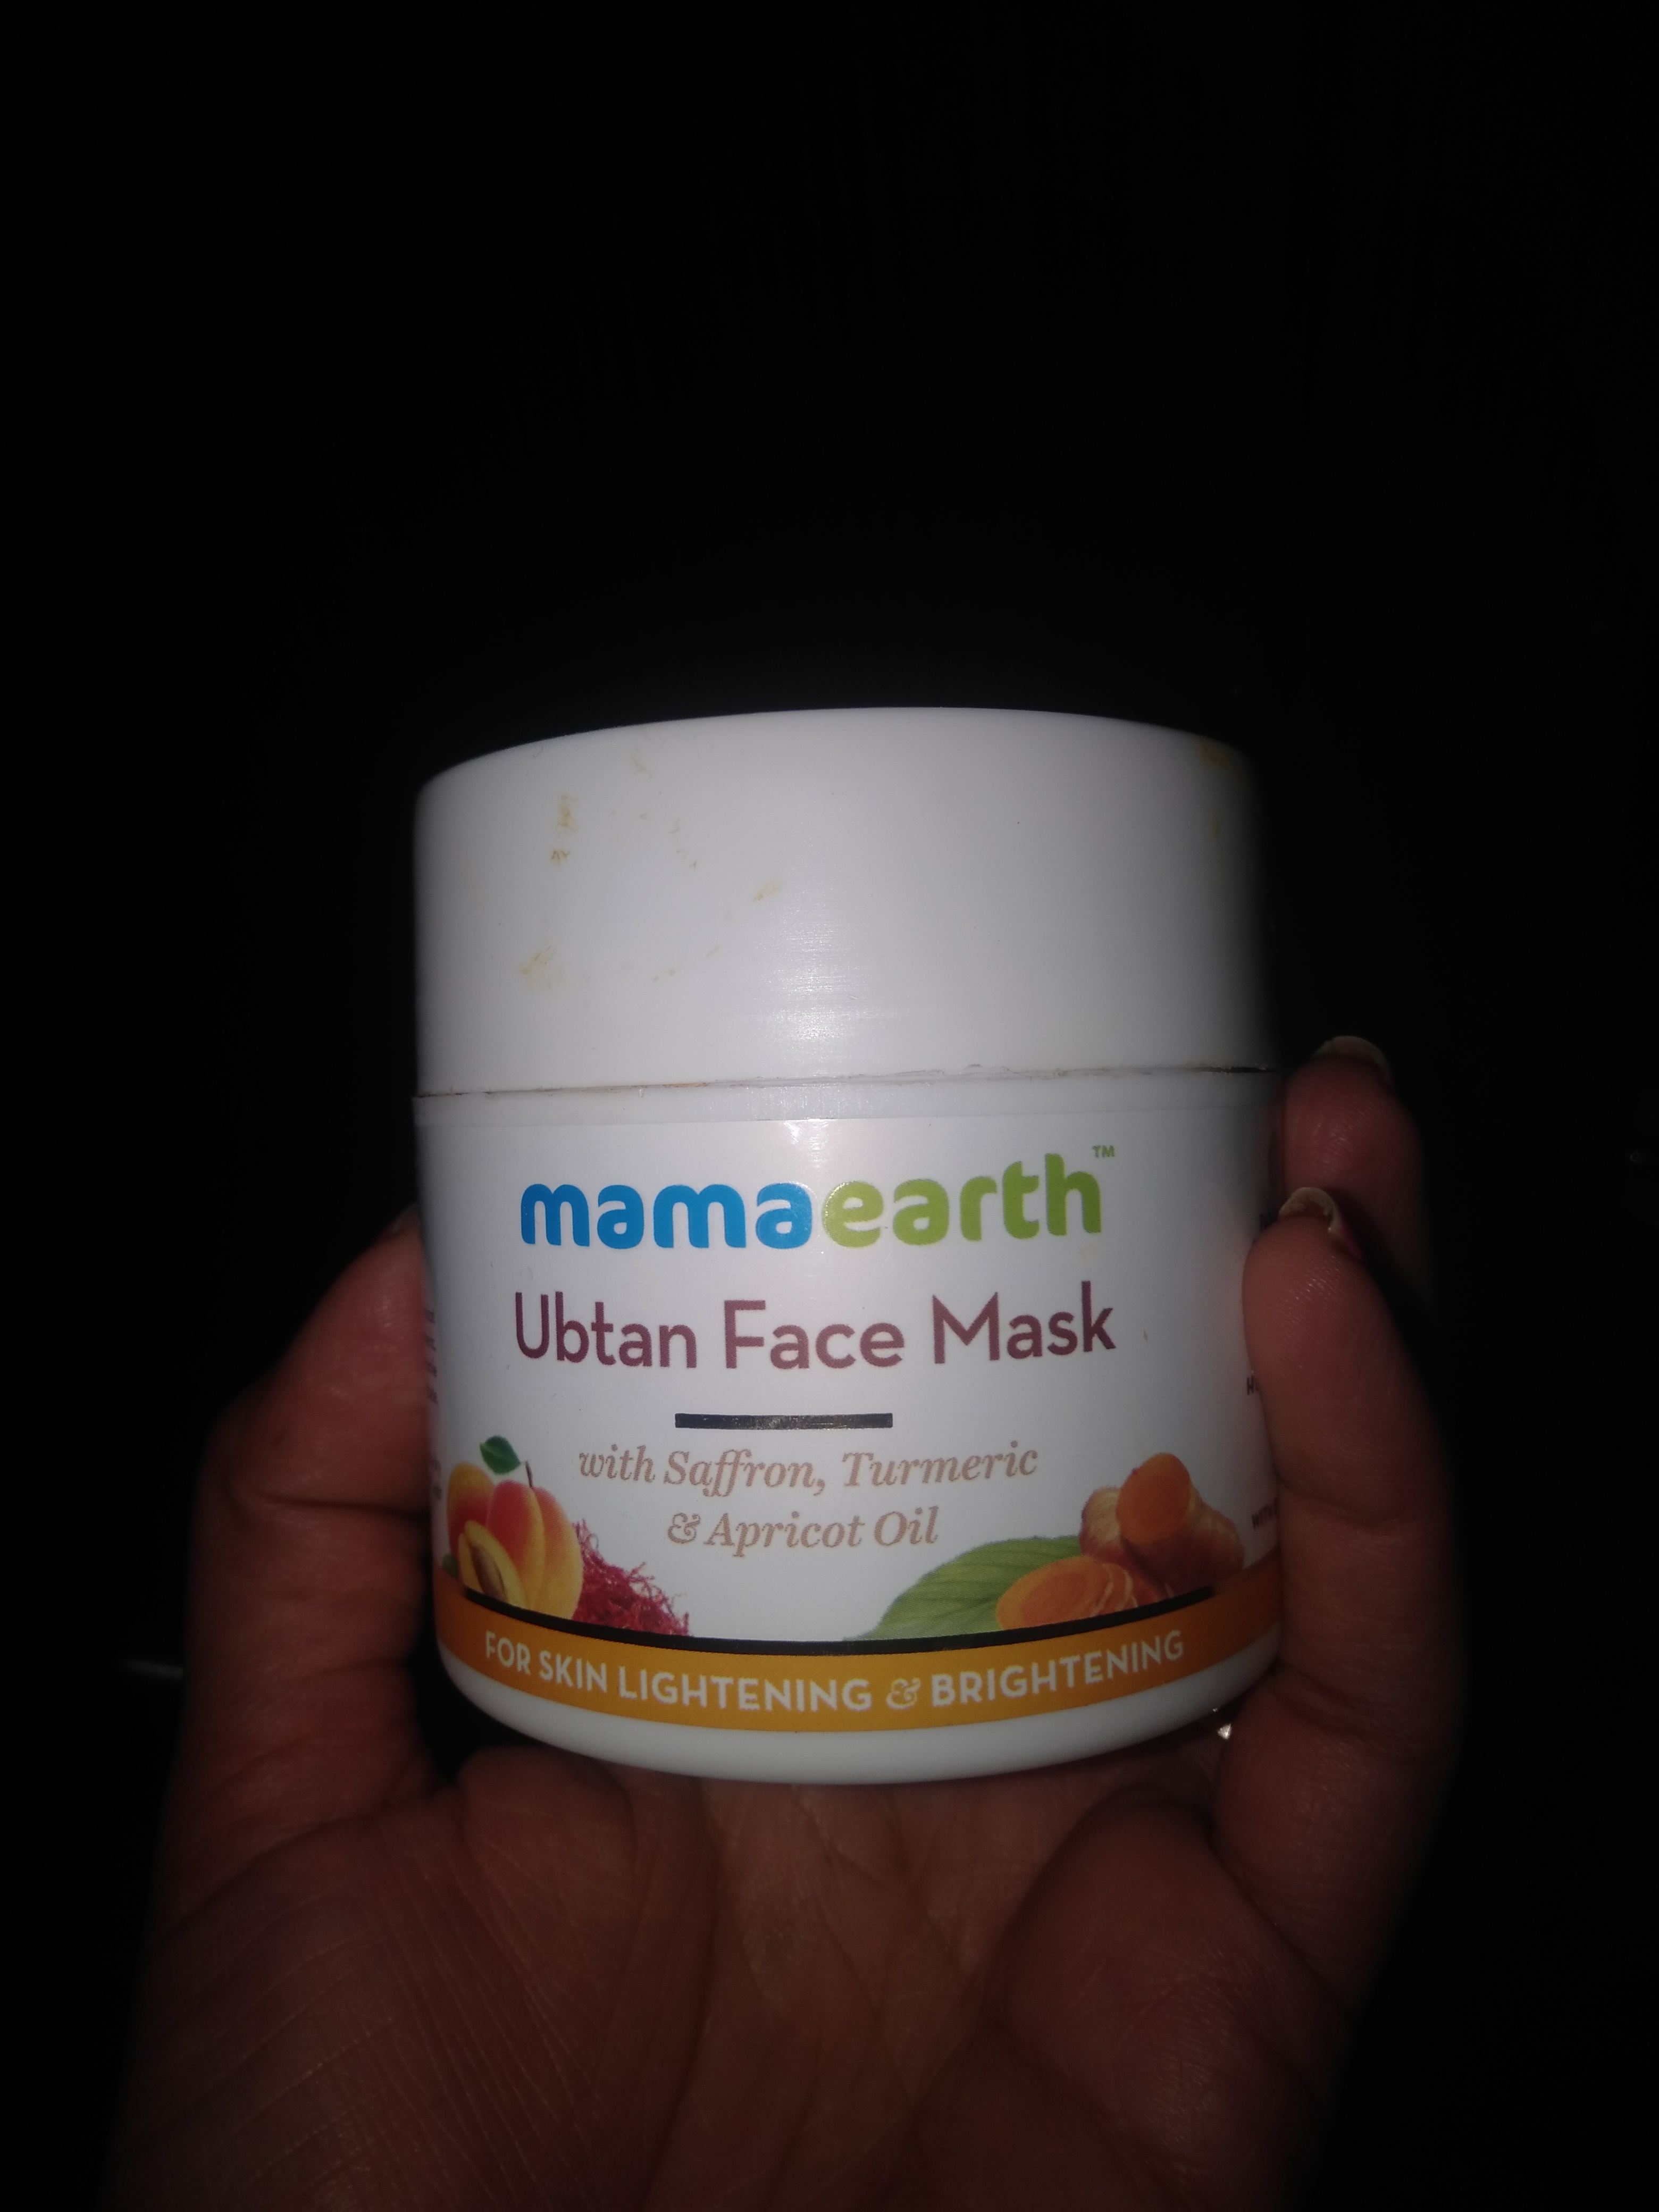 Mamaearth Ubtan Face Mask For Skin Lightening and Brightening-Awesome face mask-By sakshimalhotra